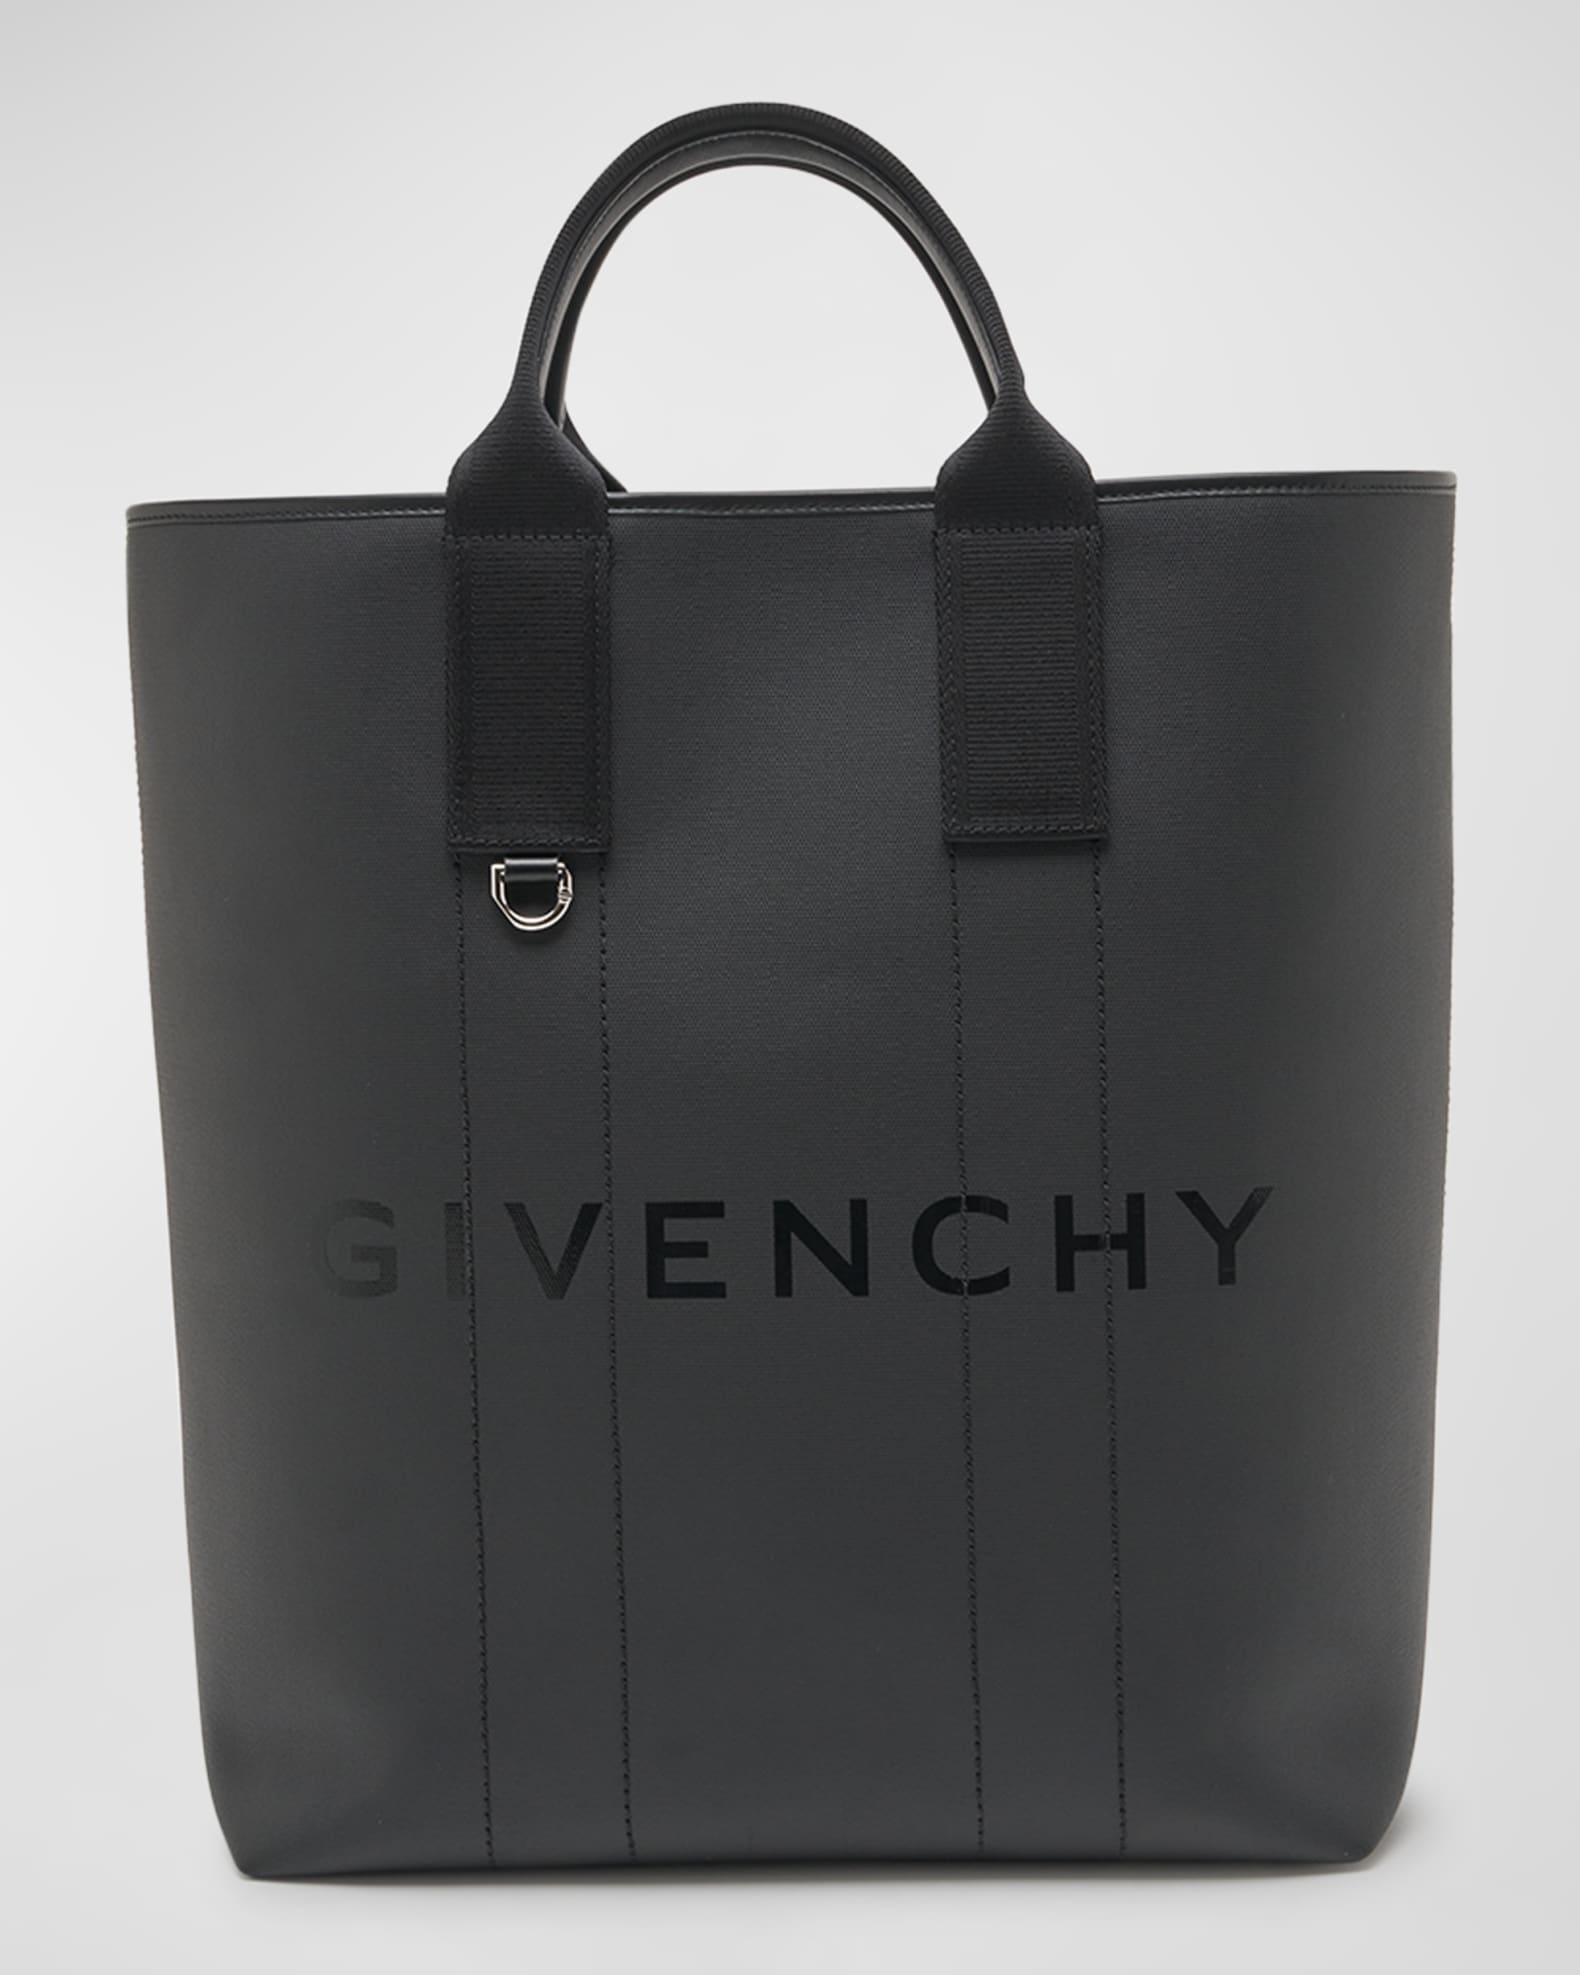 G Essentials Canvas Camera Bag in Black - Givenchy